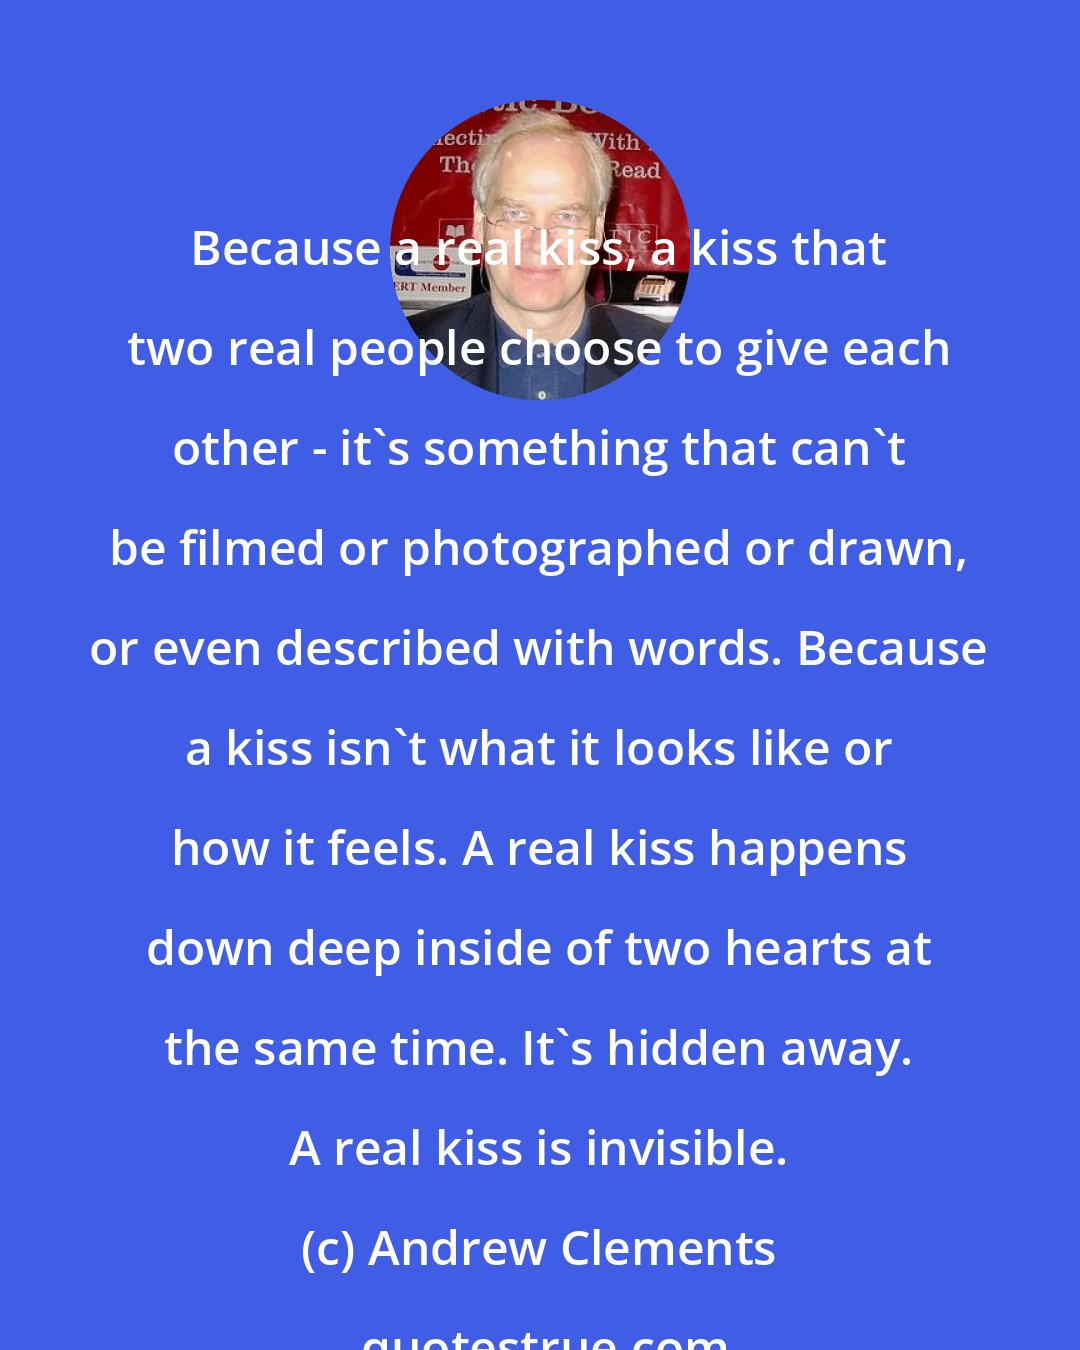 Andrew Clements: Because a real kiss, a kiss that two real people choose to give each other - it's something that can't be filmed or photographed or drawn, or even described with words. Because a kiss isn't what it looks like or how it feels. A real kiss happens down deep inside of two hearts at the same time. It's hidden away. A real kiss is invisible.